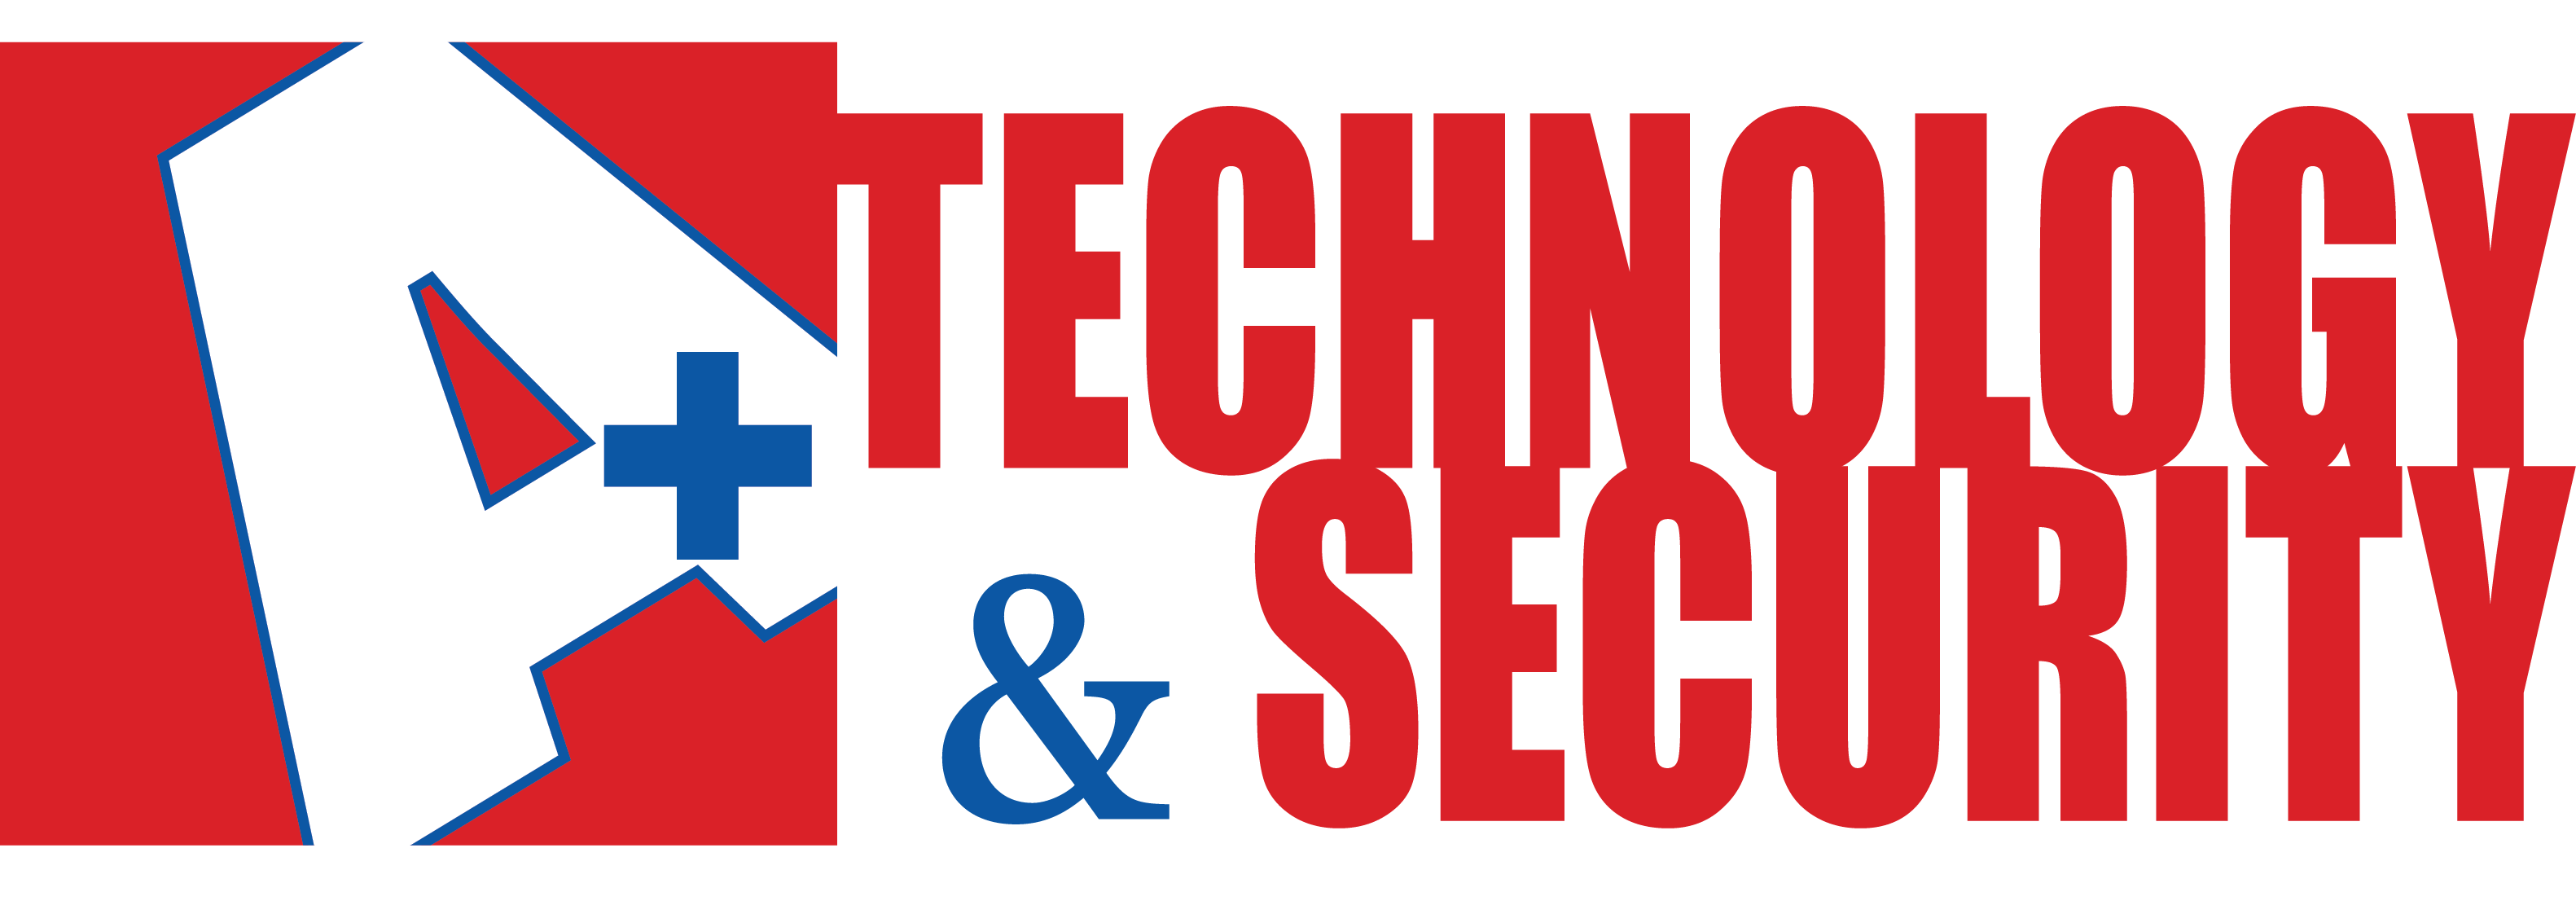 A+ Technology and Security Solutions Inc. logo